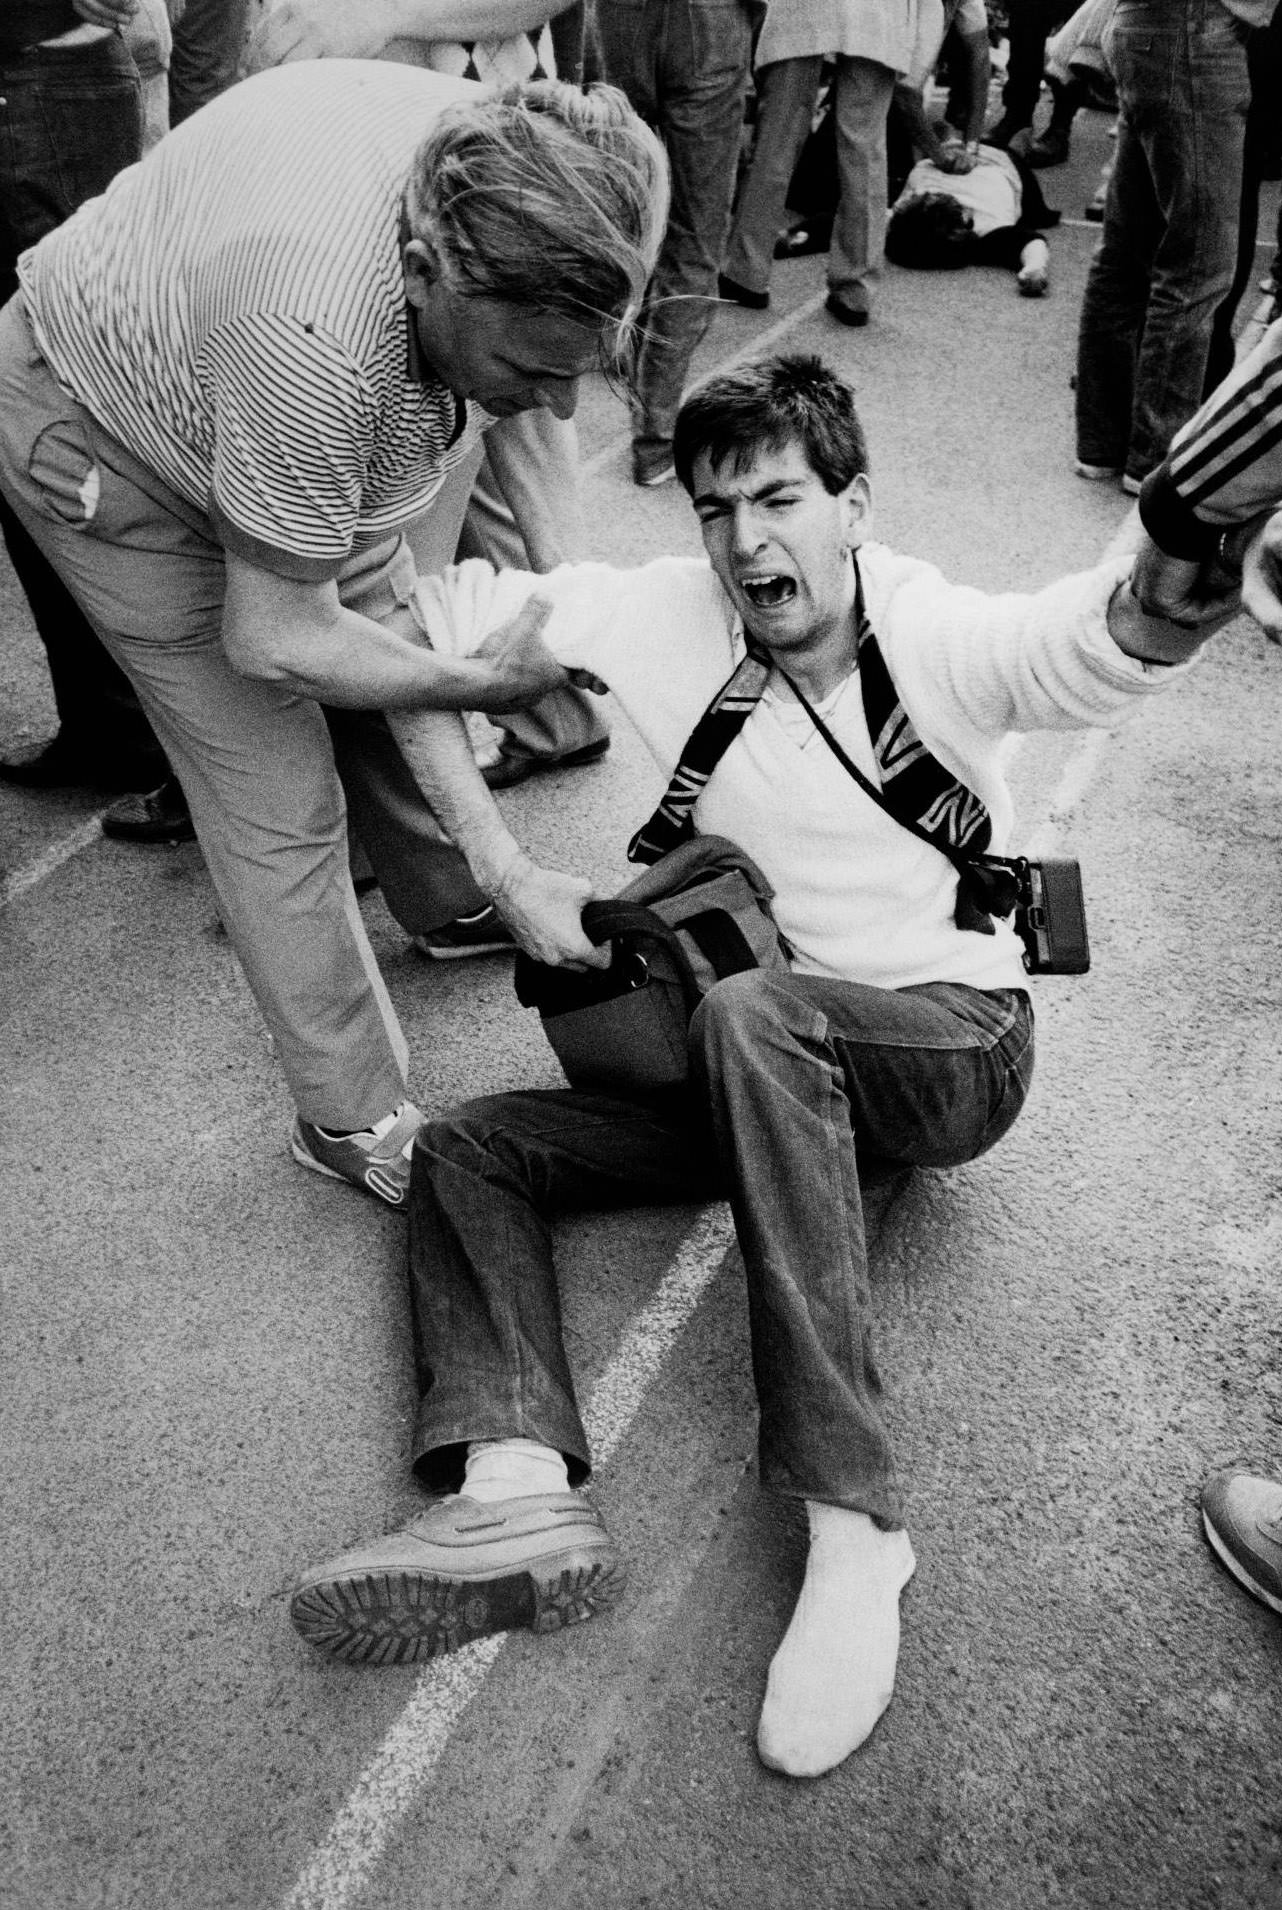 Distraught man sits on the ground after Juventus fans crushed at Heysel Stadium, European Cup Final, 1985.